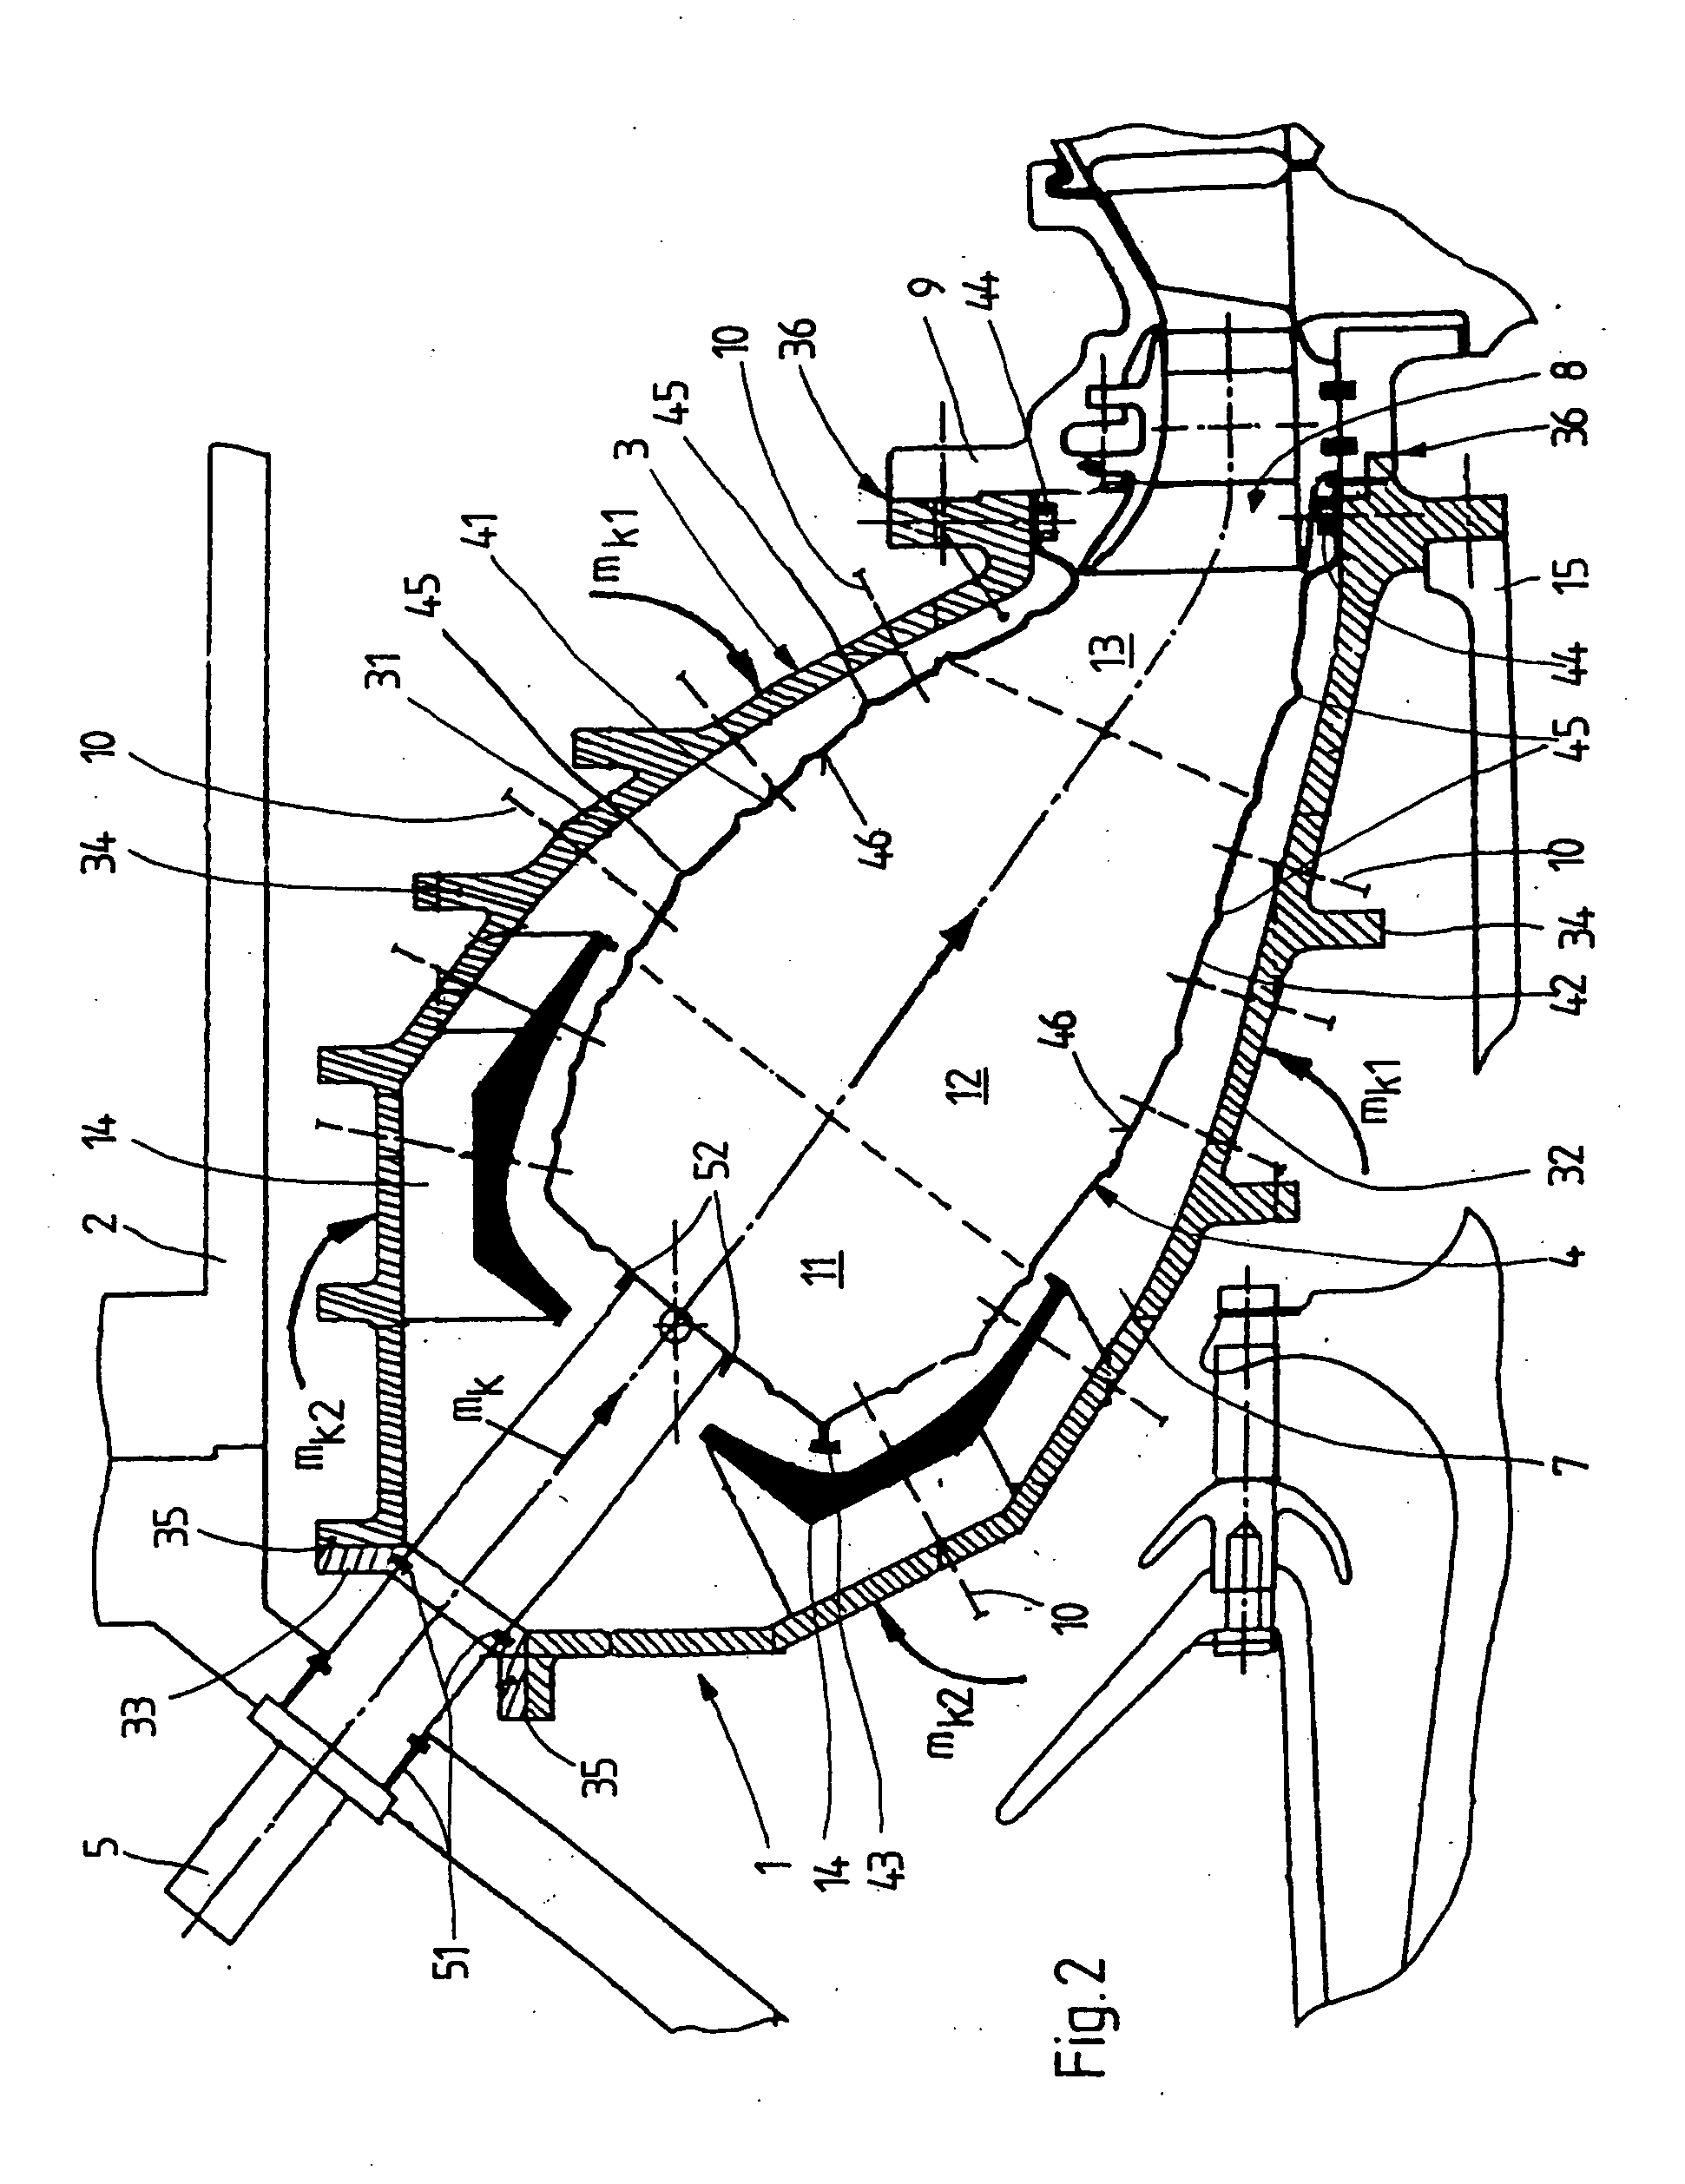 Annular combustion chamber for a gas turbine